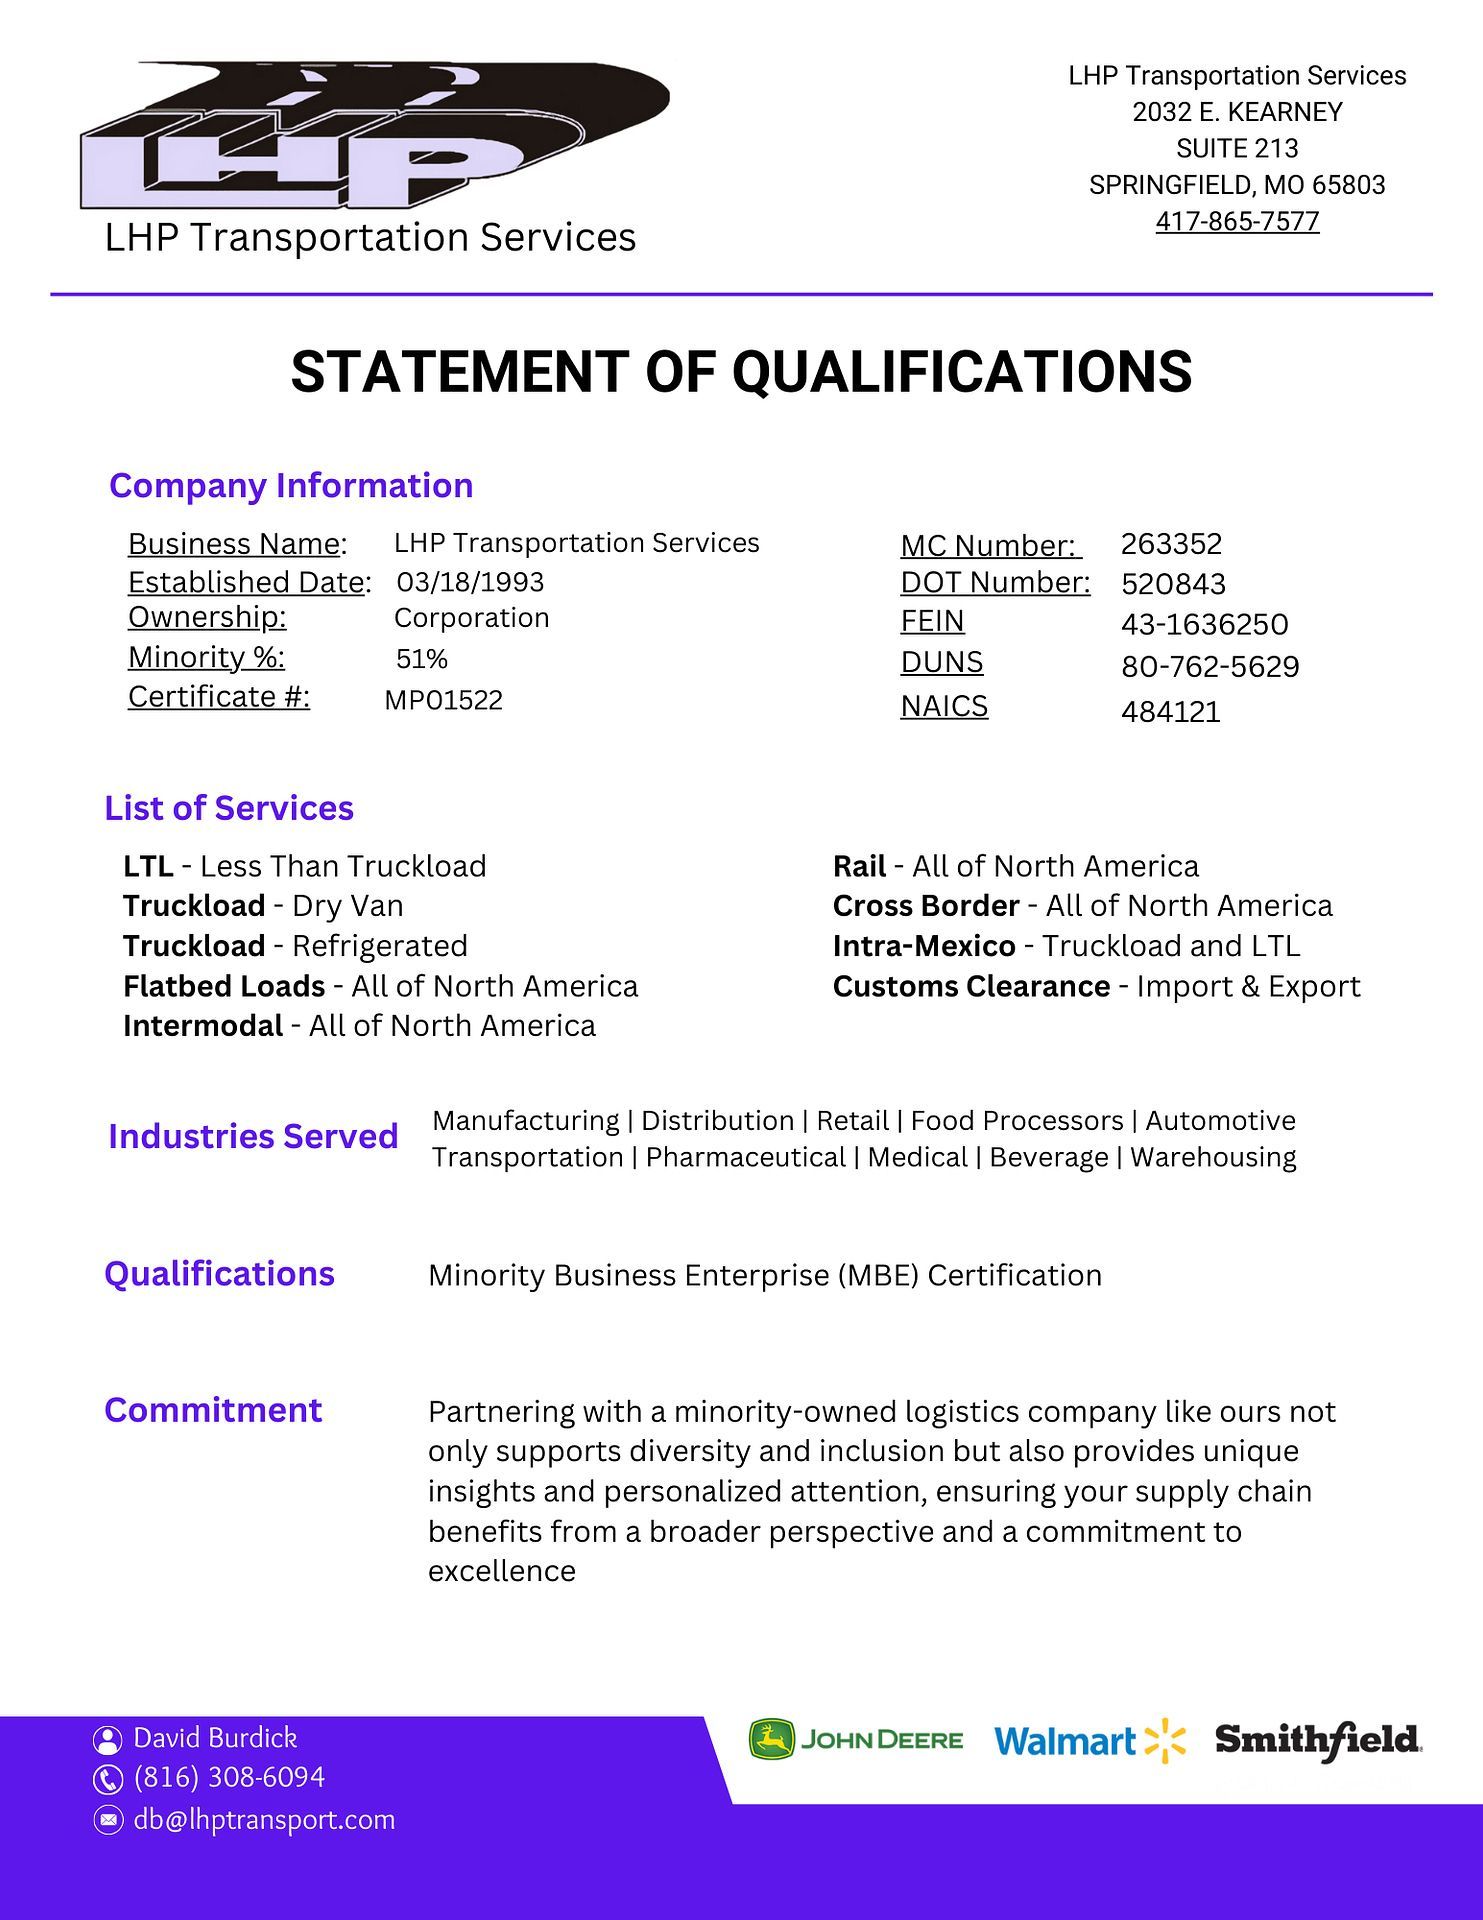 It is a statement of qualifications for a company.